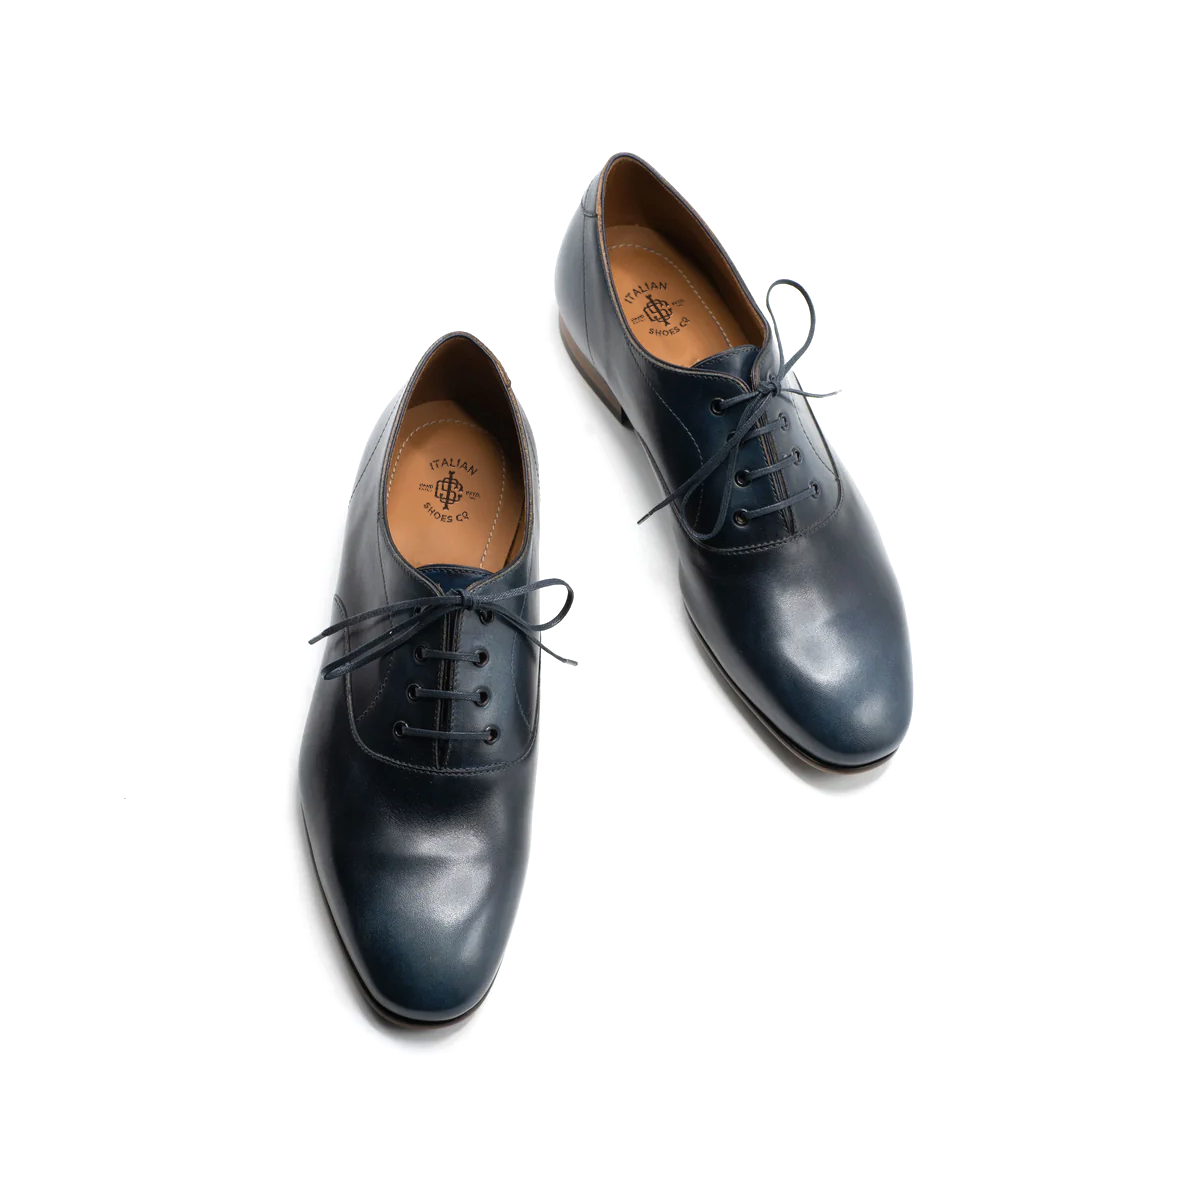 Ethereal Echo Oxford Shoes